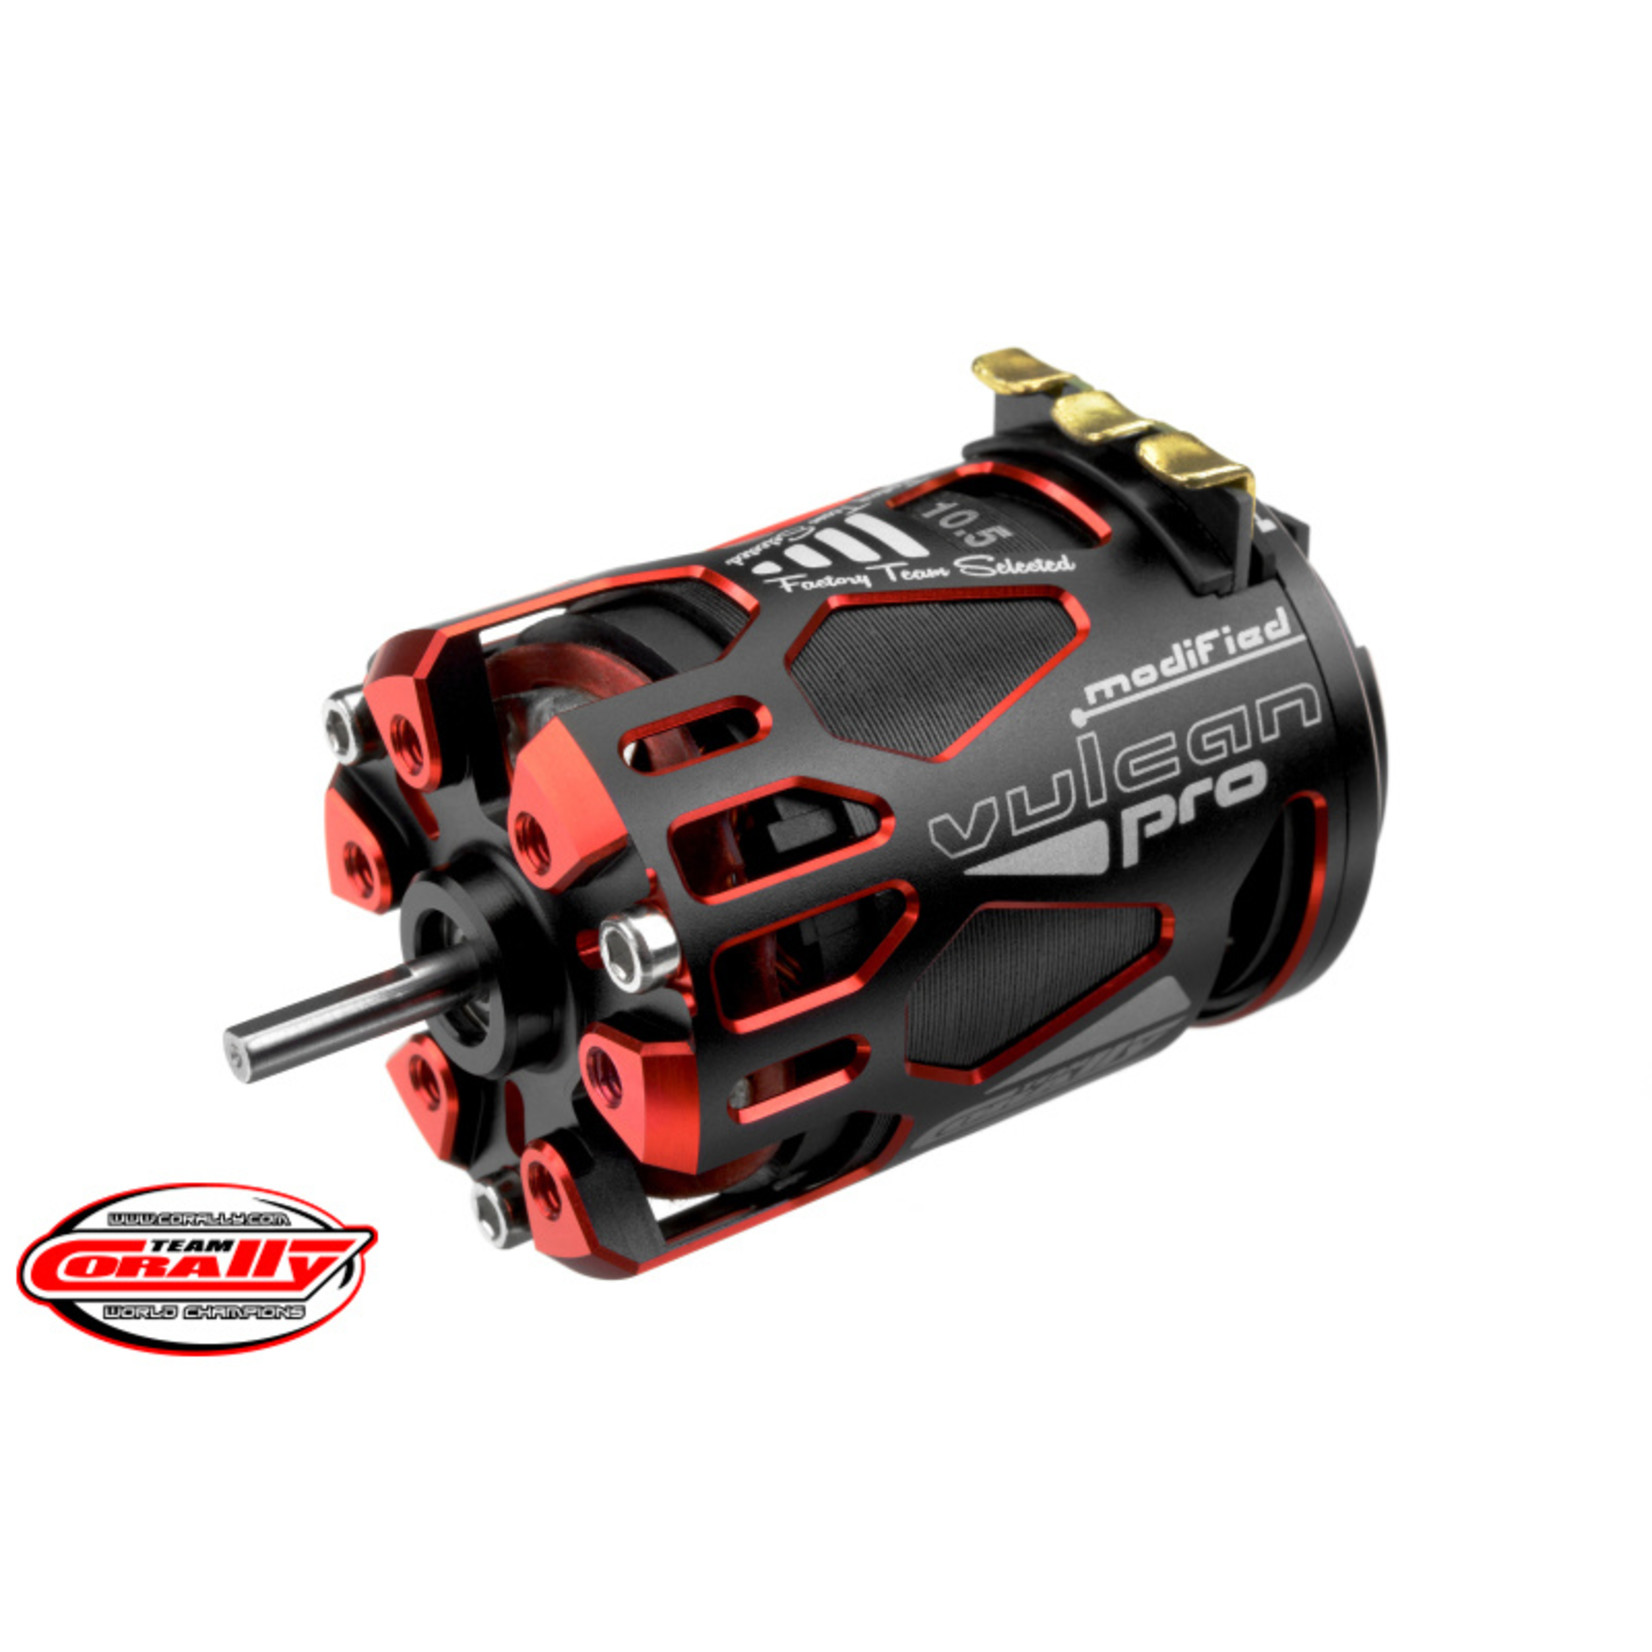 Corally (Team Corally) Vulcan Pro Modified 1/10 Sensored Brushless Motor